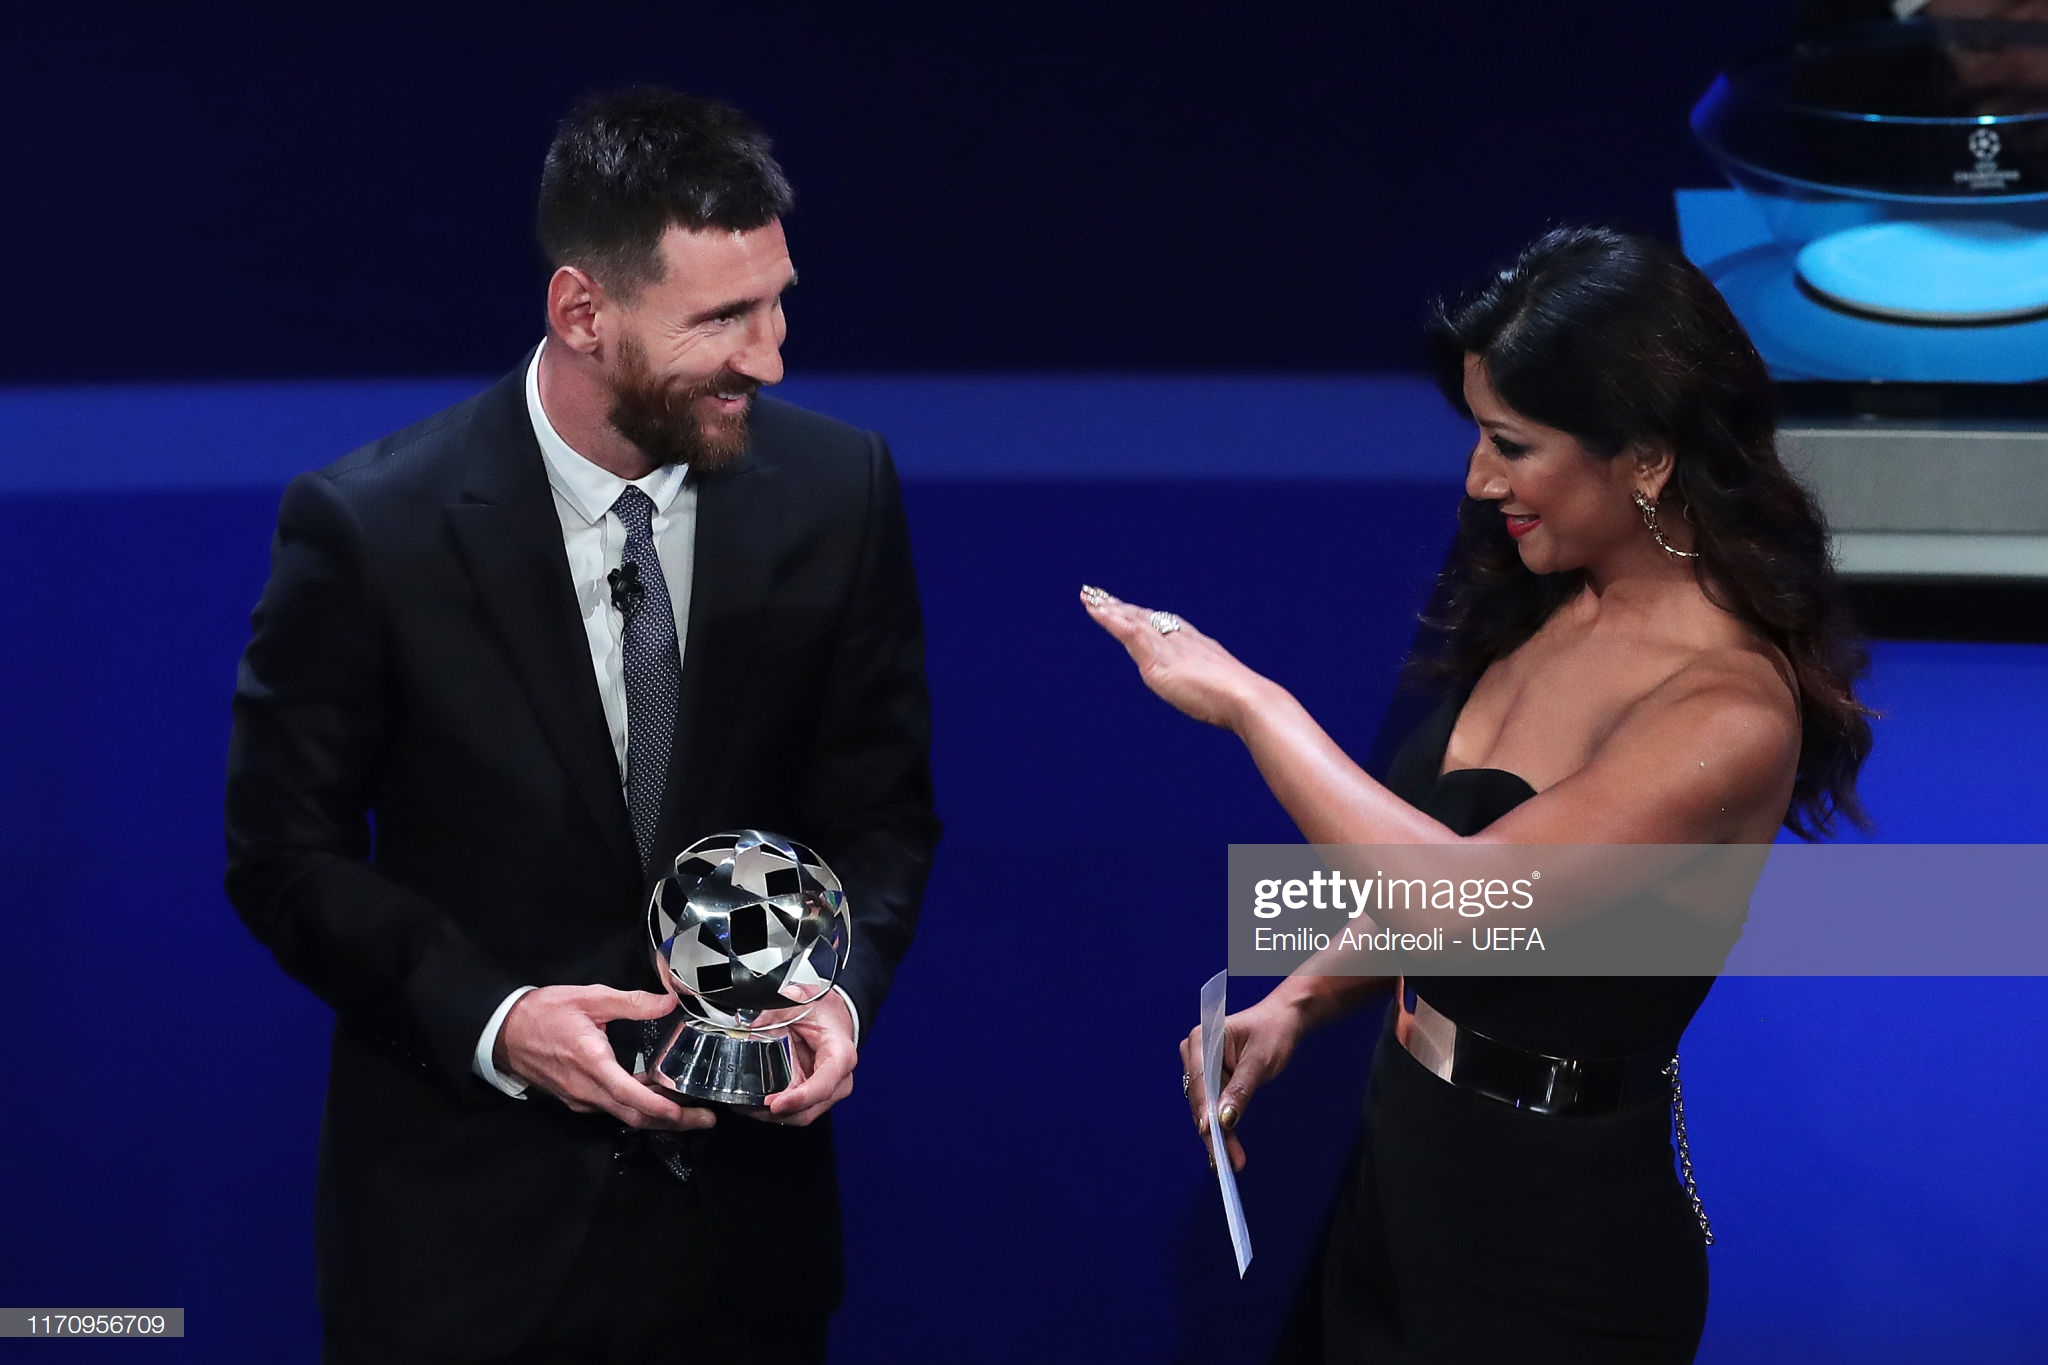 gettyimages-1170956709-2048x2048.jpg